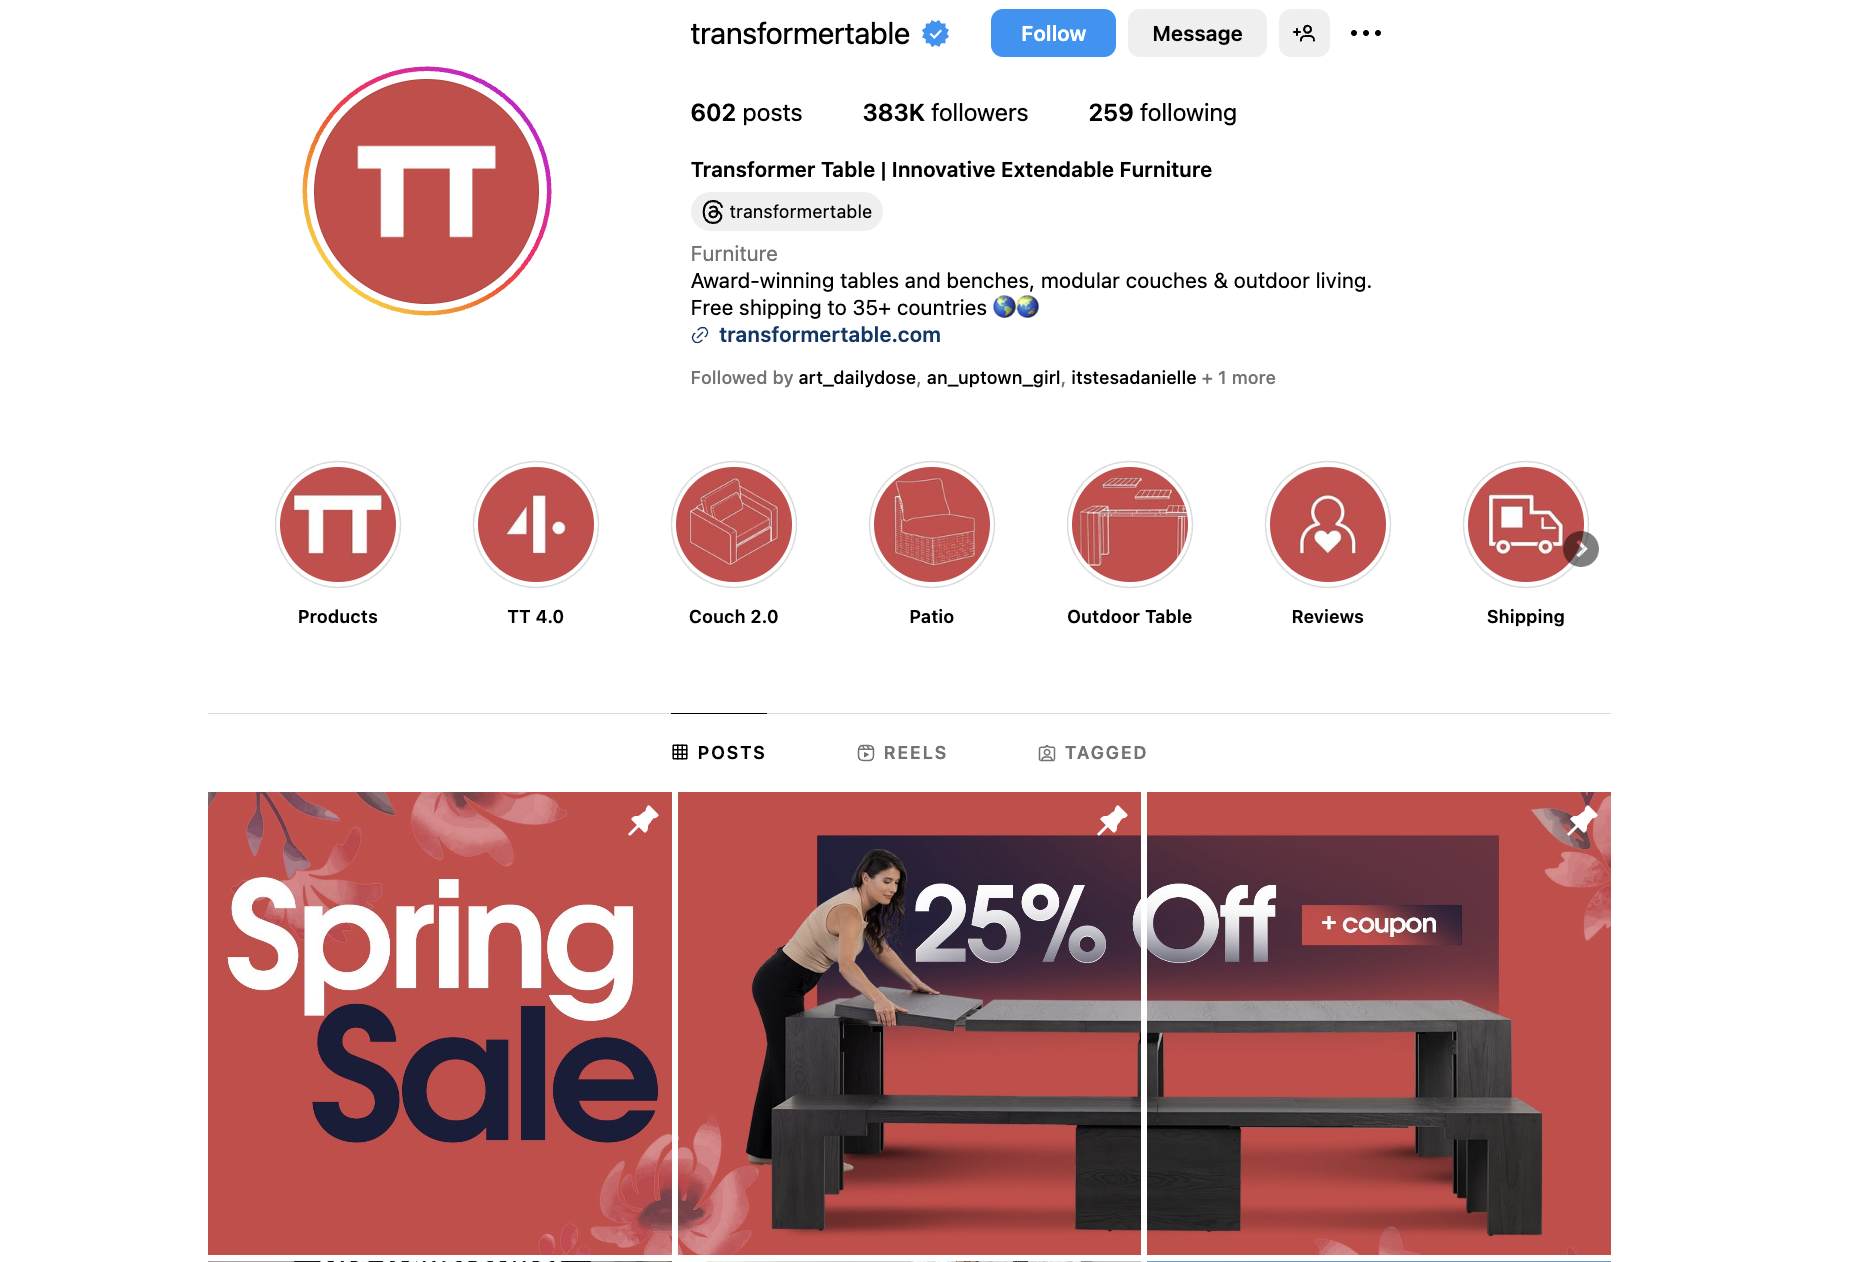 Transformer Table Instagram profile page with sales offer spanning the top of grid